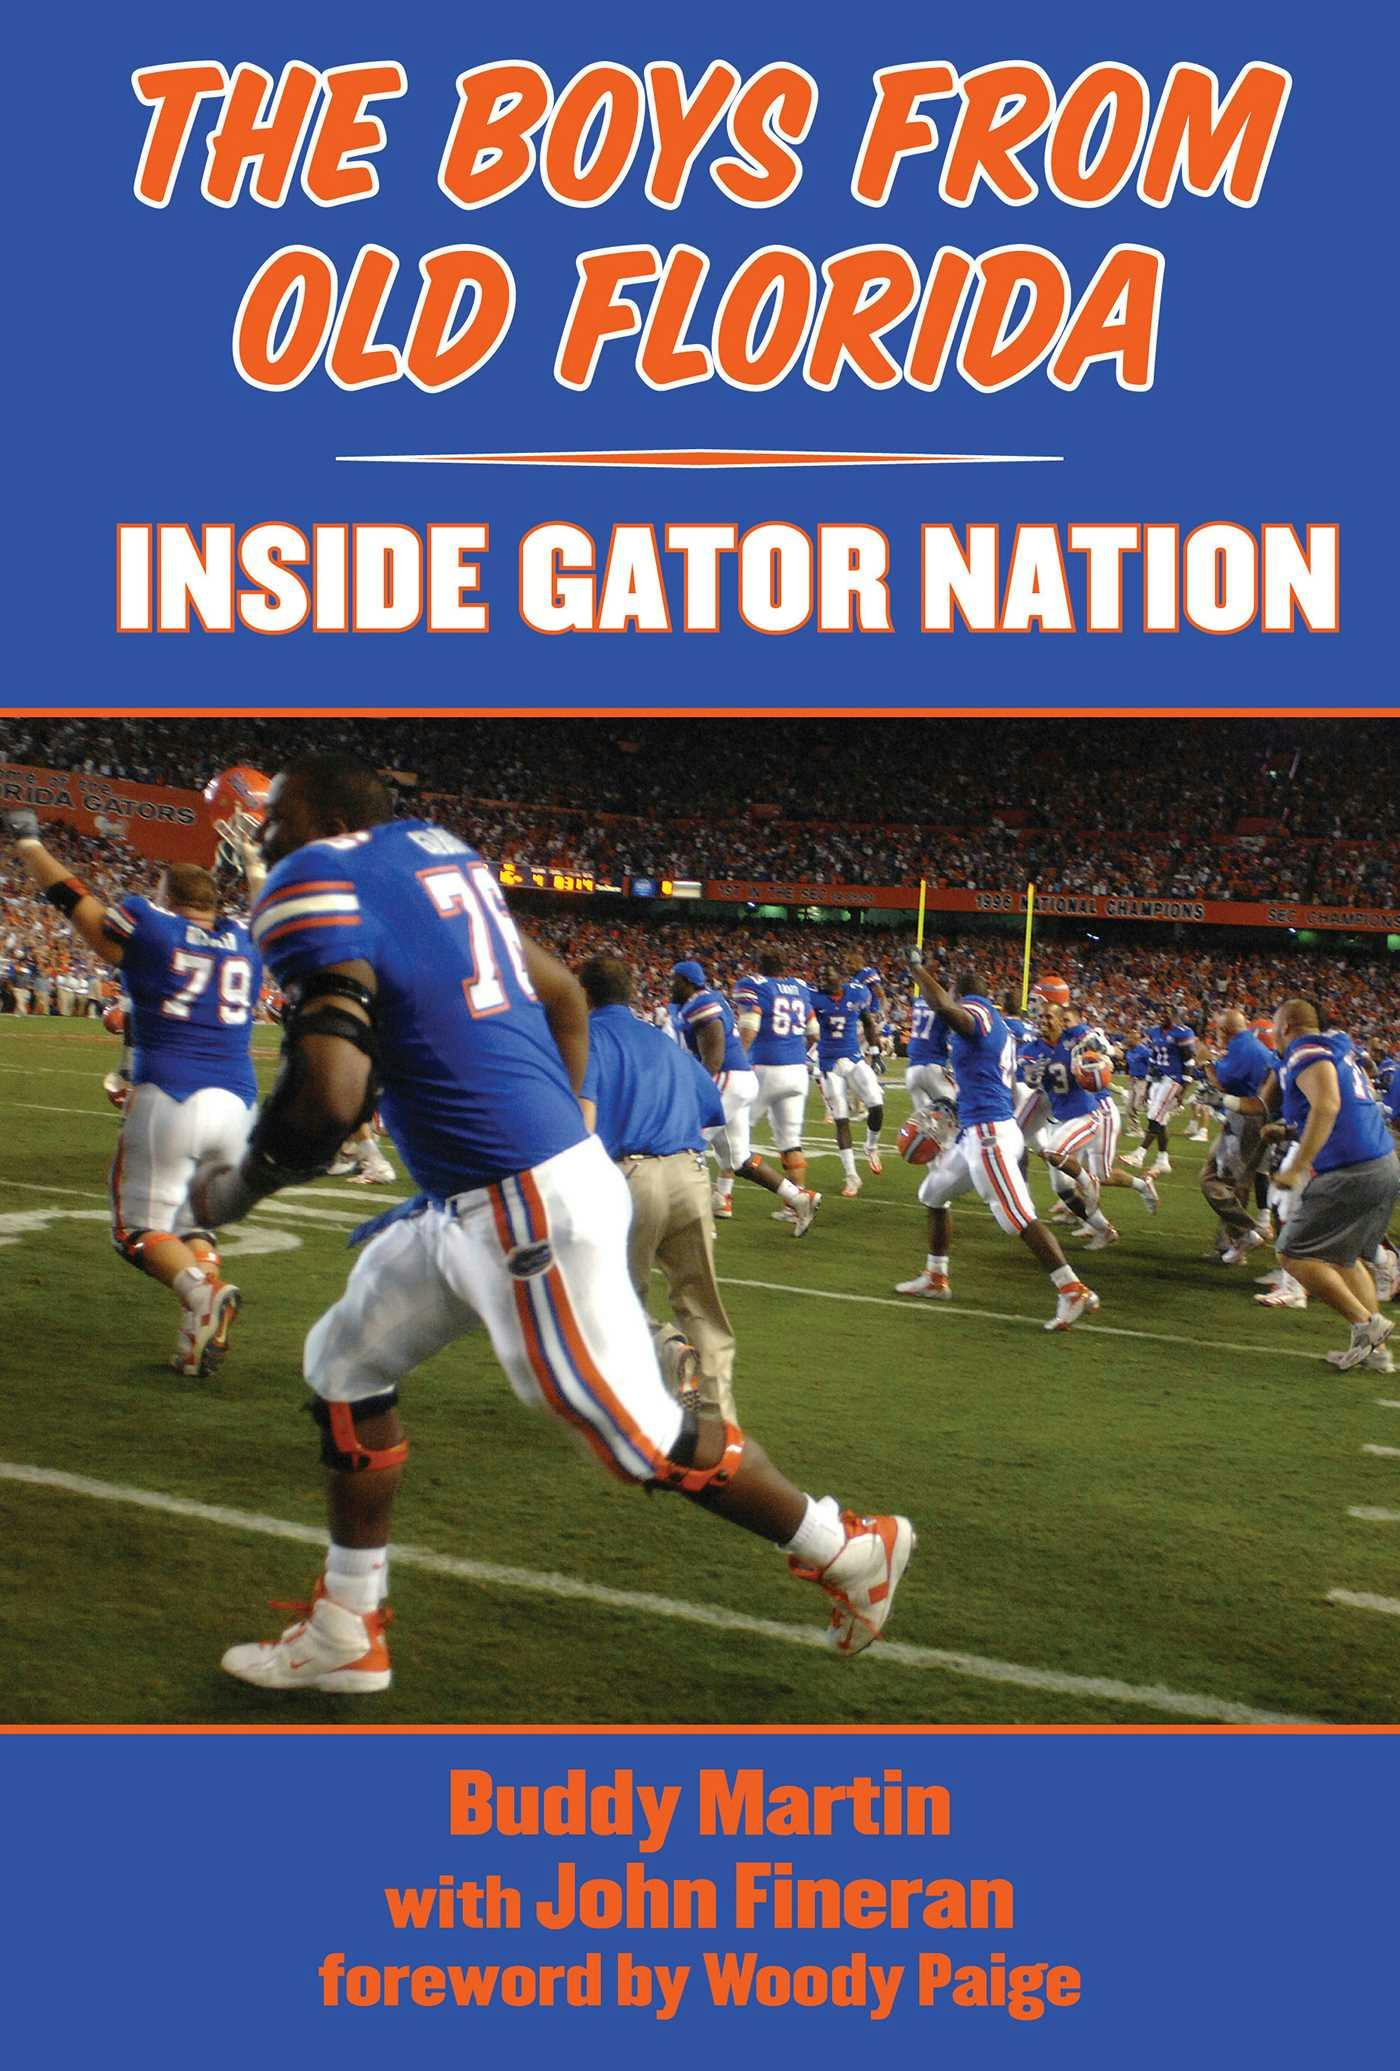 The Boys from Old Florida: Inside Gator Nation - Buddy Martin